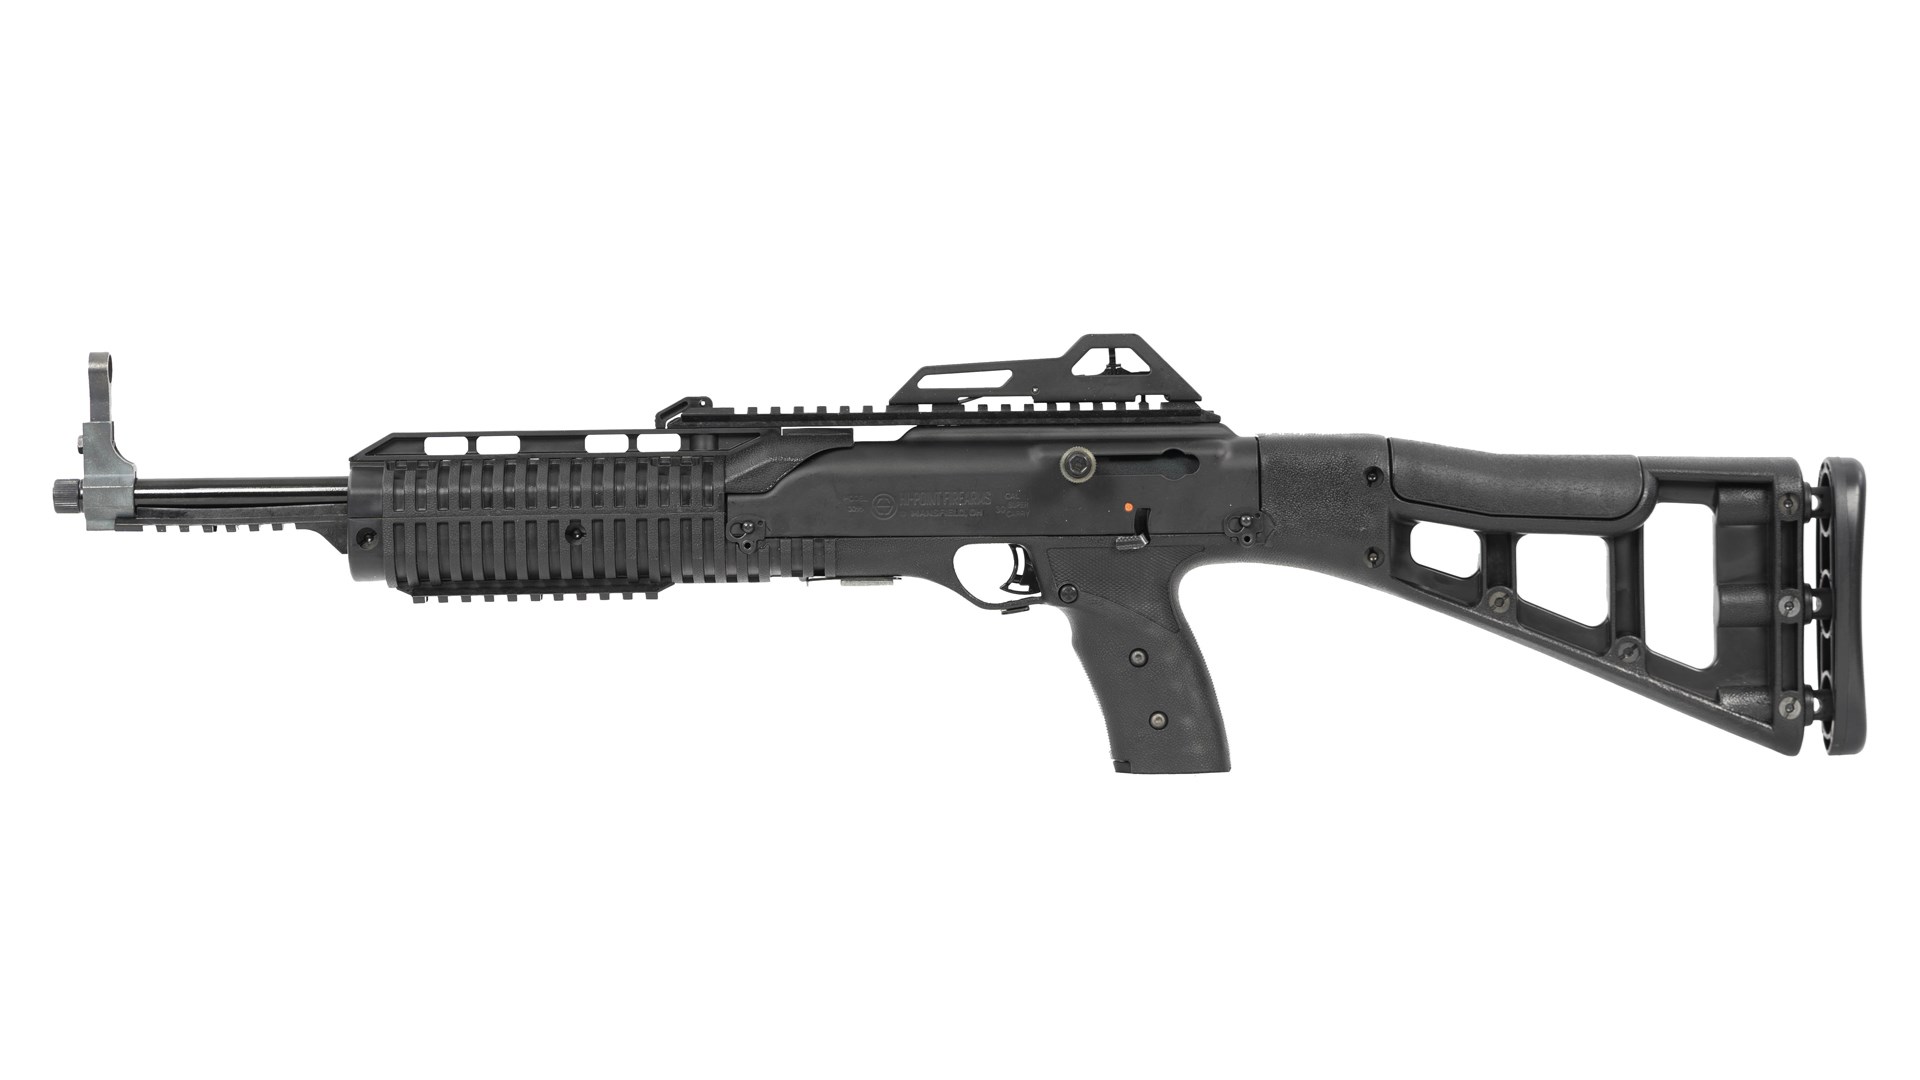 Left side of the Hi-Point 3095 carbine shown on white.